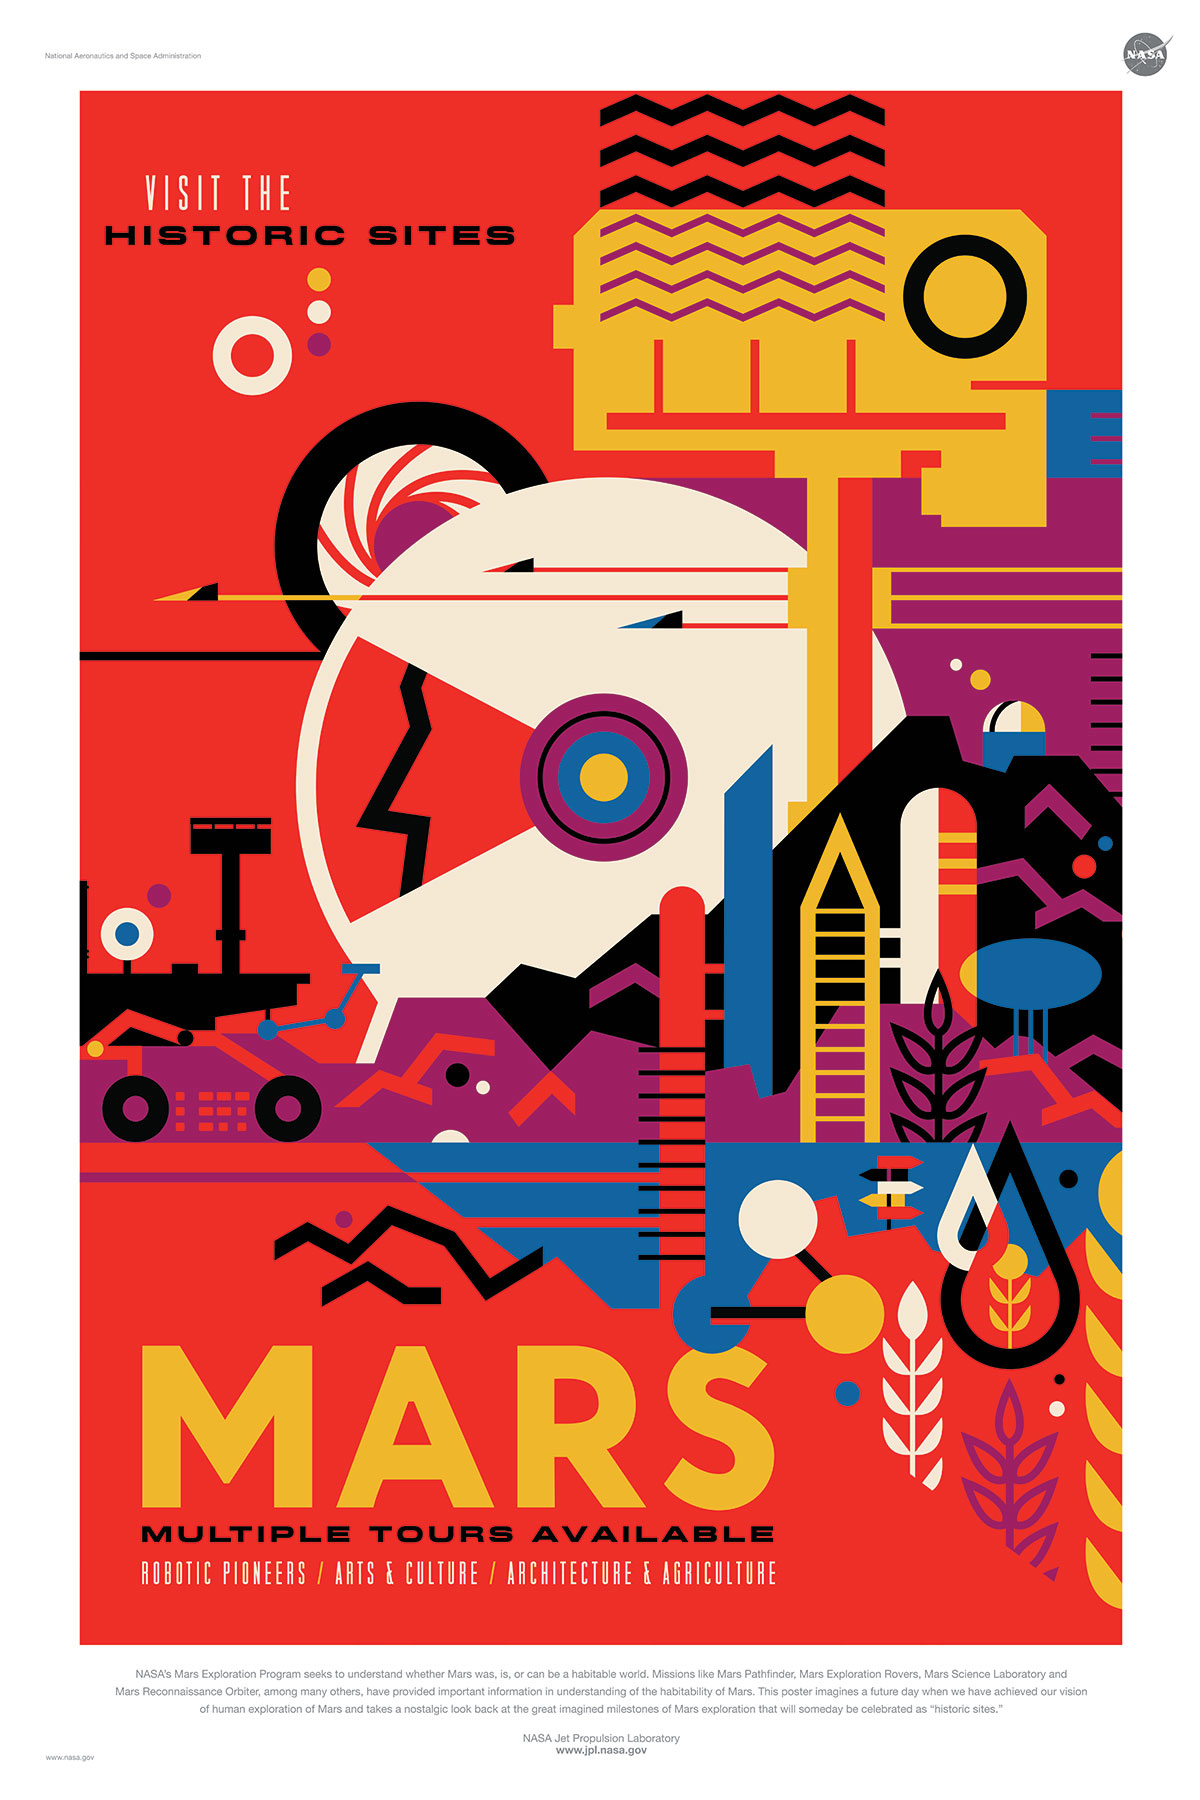 NASA poster promoting space travel to Mars